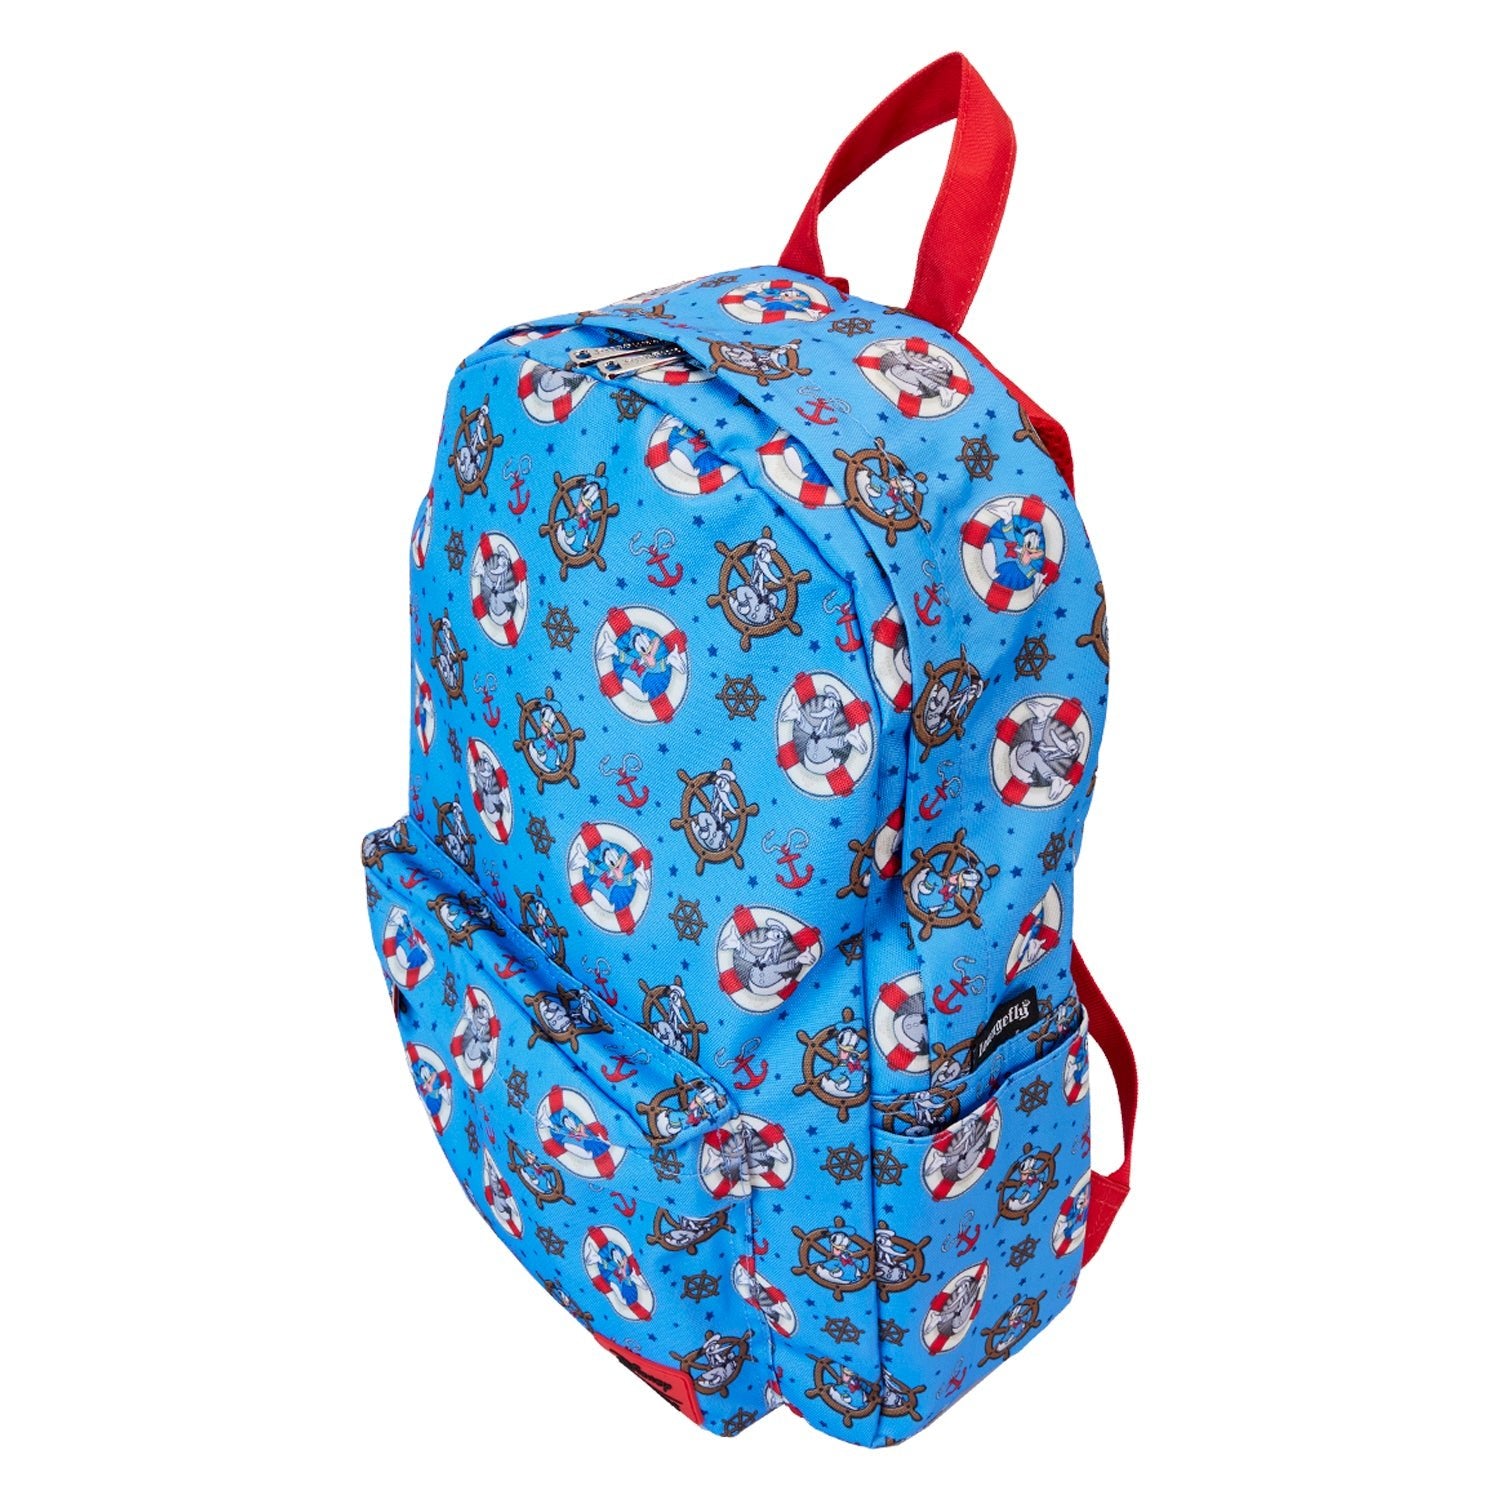 Loungefly x Disney Donald Duck 90th Anniversary Nylon Backpack - GeekCore